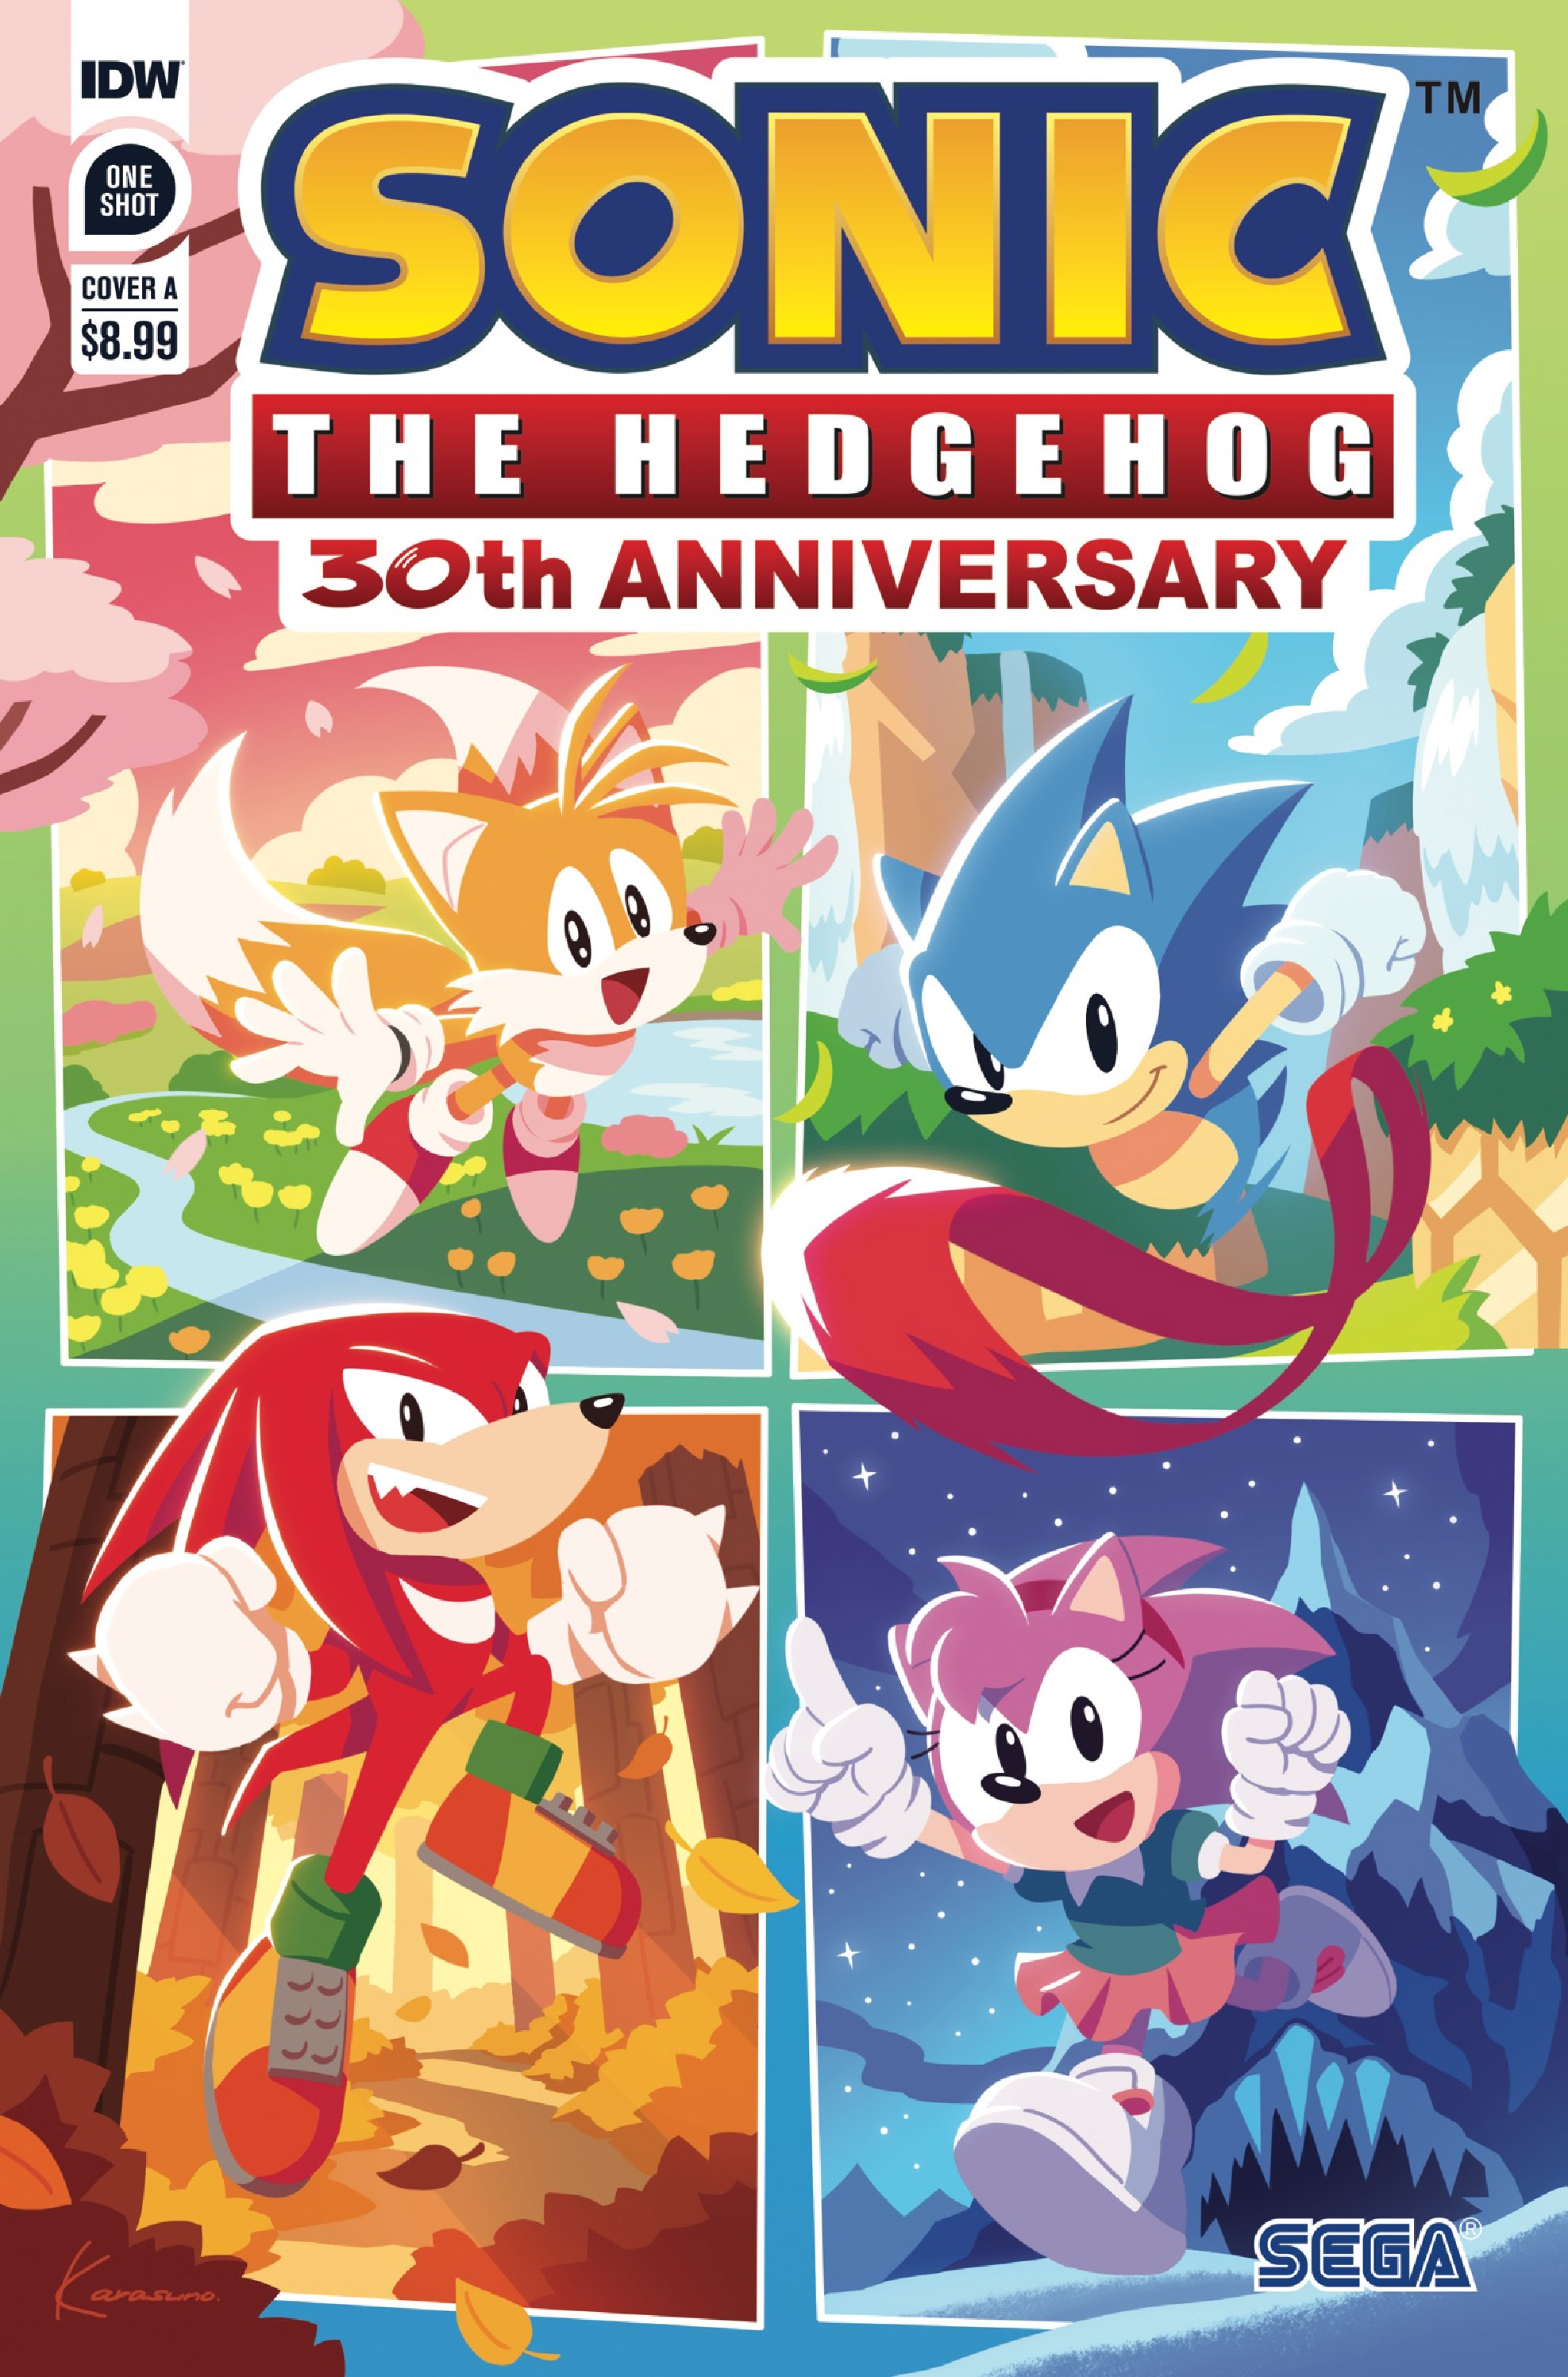 Sonic the Hedgehog 30th Anniversary comic cover A - featuring Sonic running, Tails flying, Knuckles jumping, and Amy running